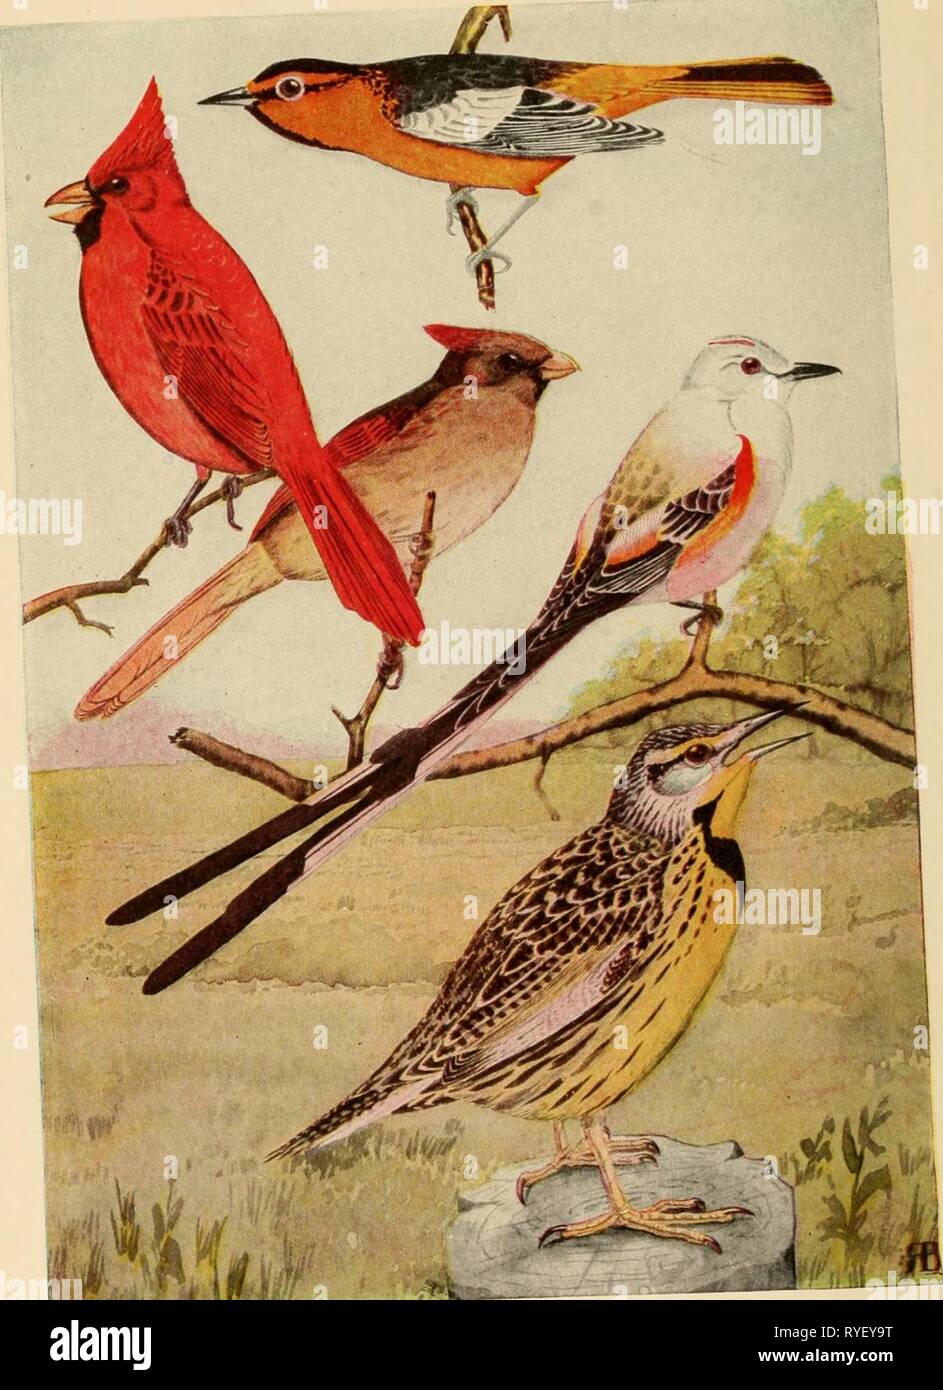 Elementary principles of agriculture : a text book for the common schools  elementaryprinci02ferg Year: 1913    OUR BIRD FRIENDS What do they eat? See Figs. 119 and 120. Red Bird or Sinai (mafe and female,, Bullock's Oriole, Scssor Taded Fly Catcher, and Meadow Lark. Stock Photo